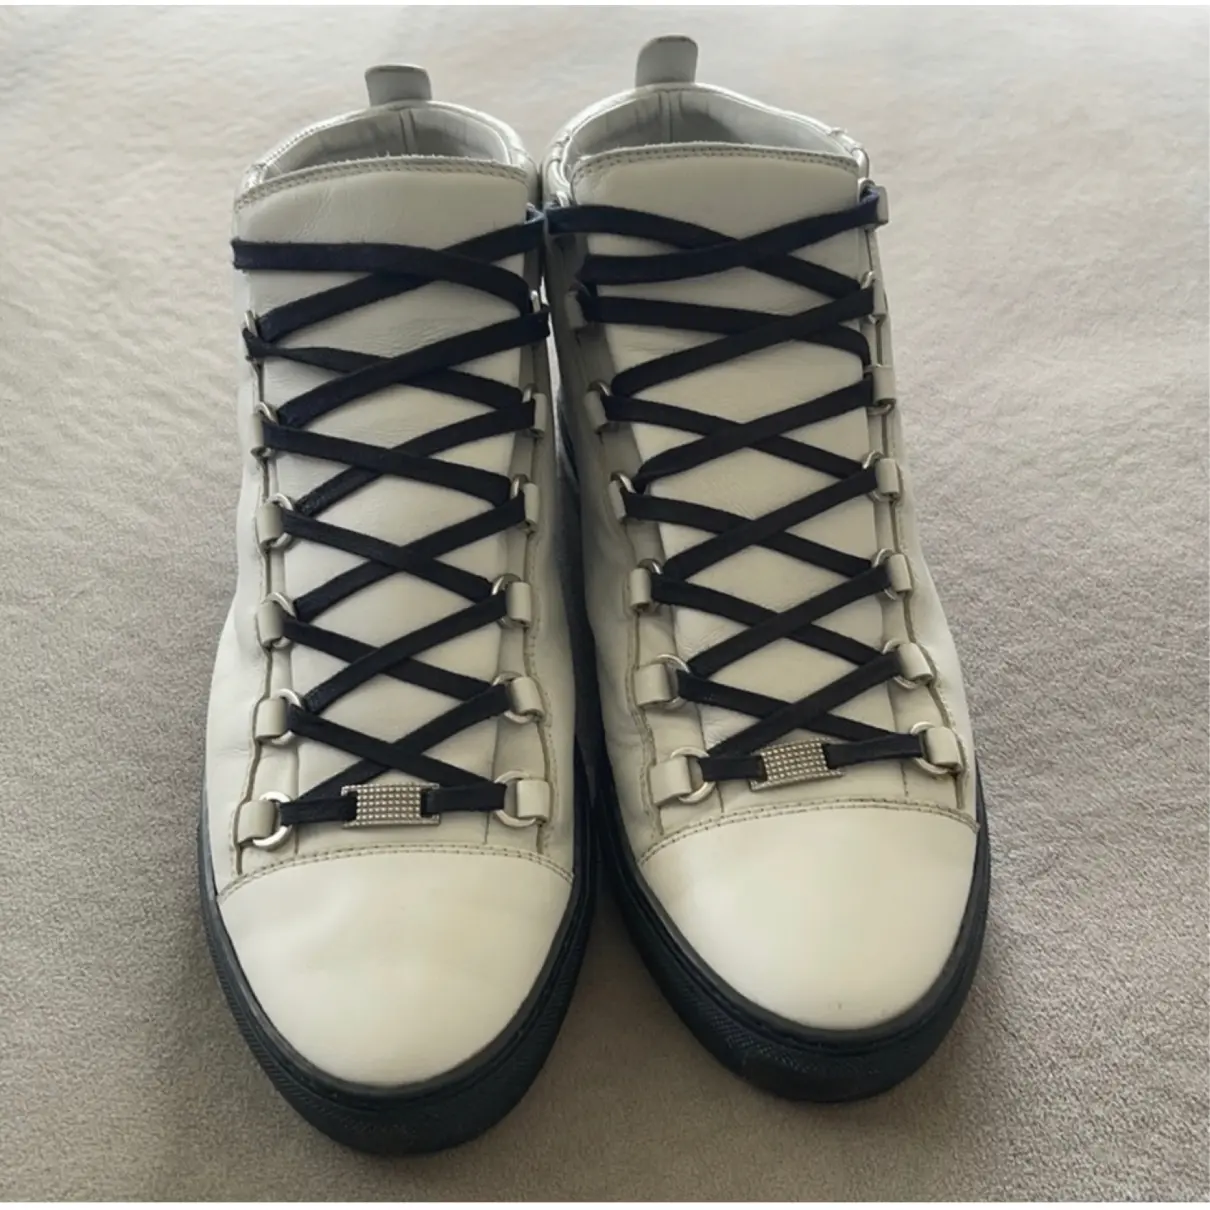 Buy Balenciaga Arena leather high trainers online